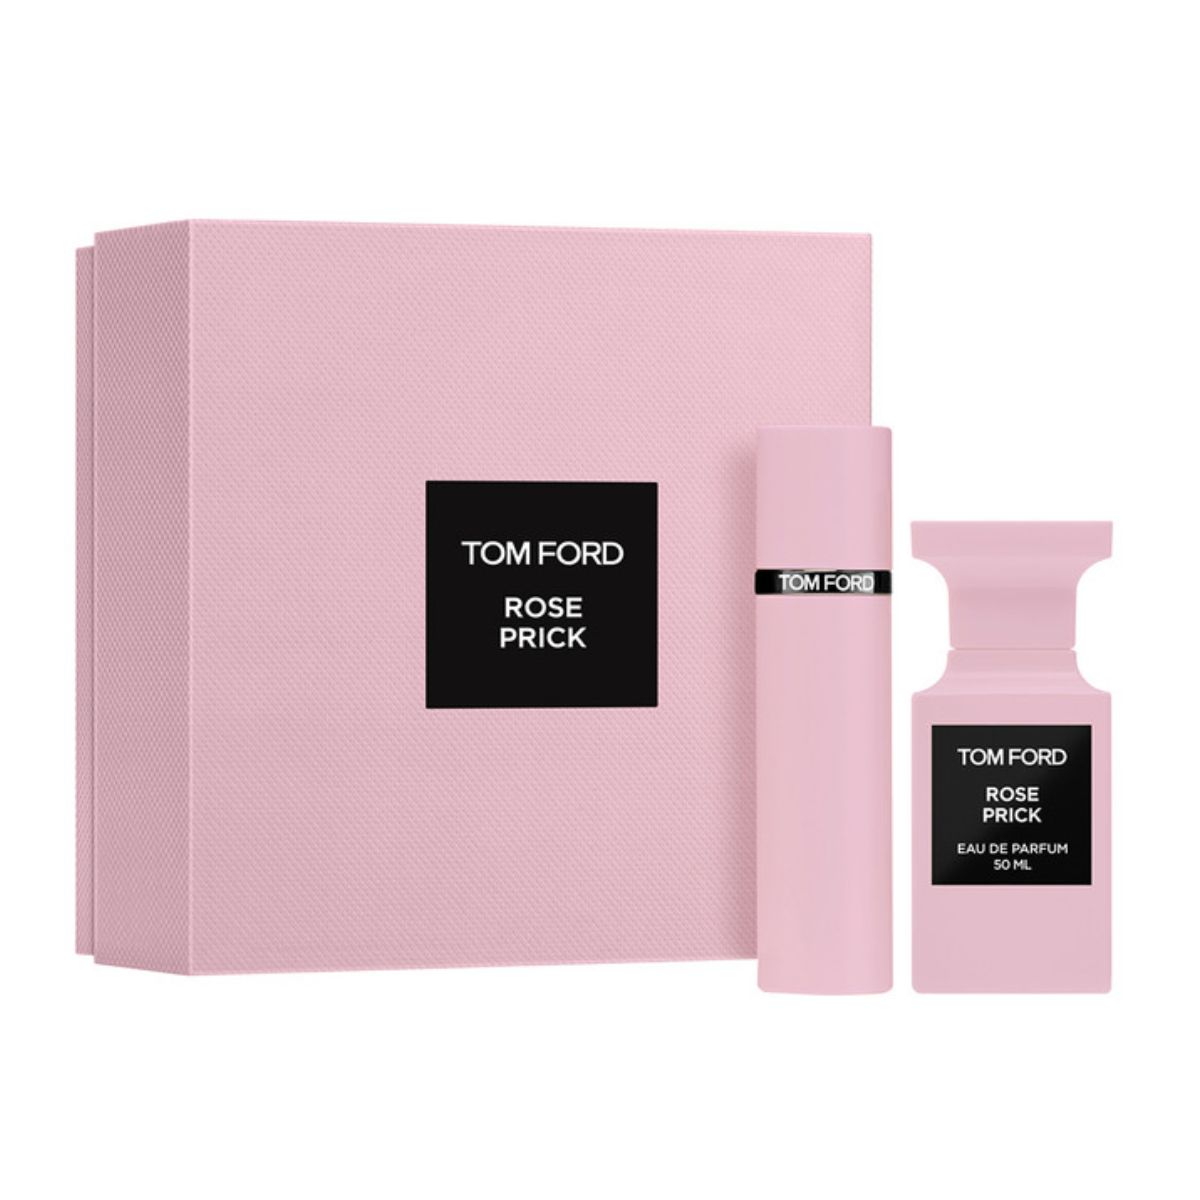 14 of the Best Perfume Gift Sets for Her This Christmas